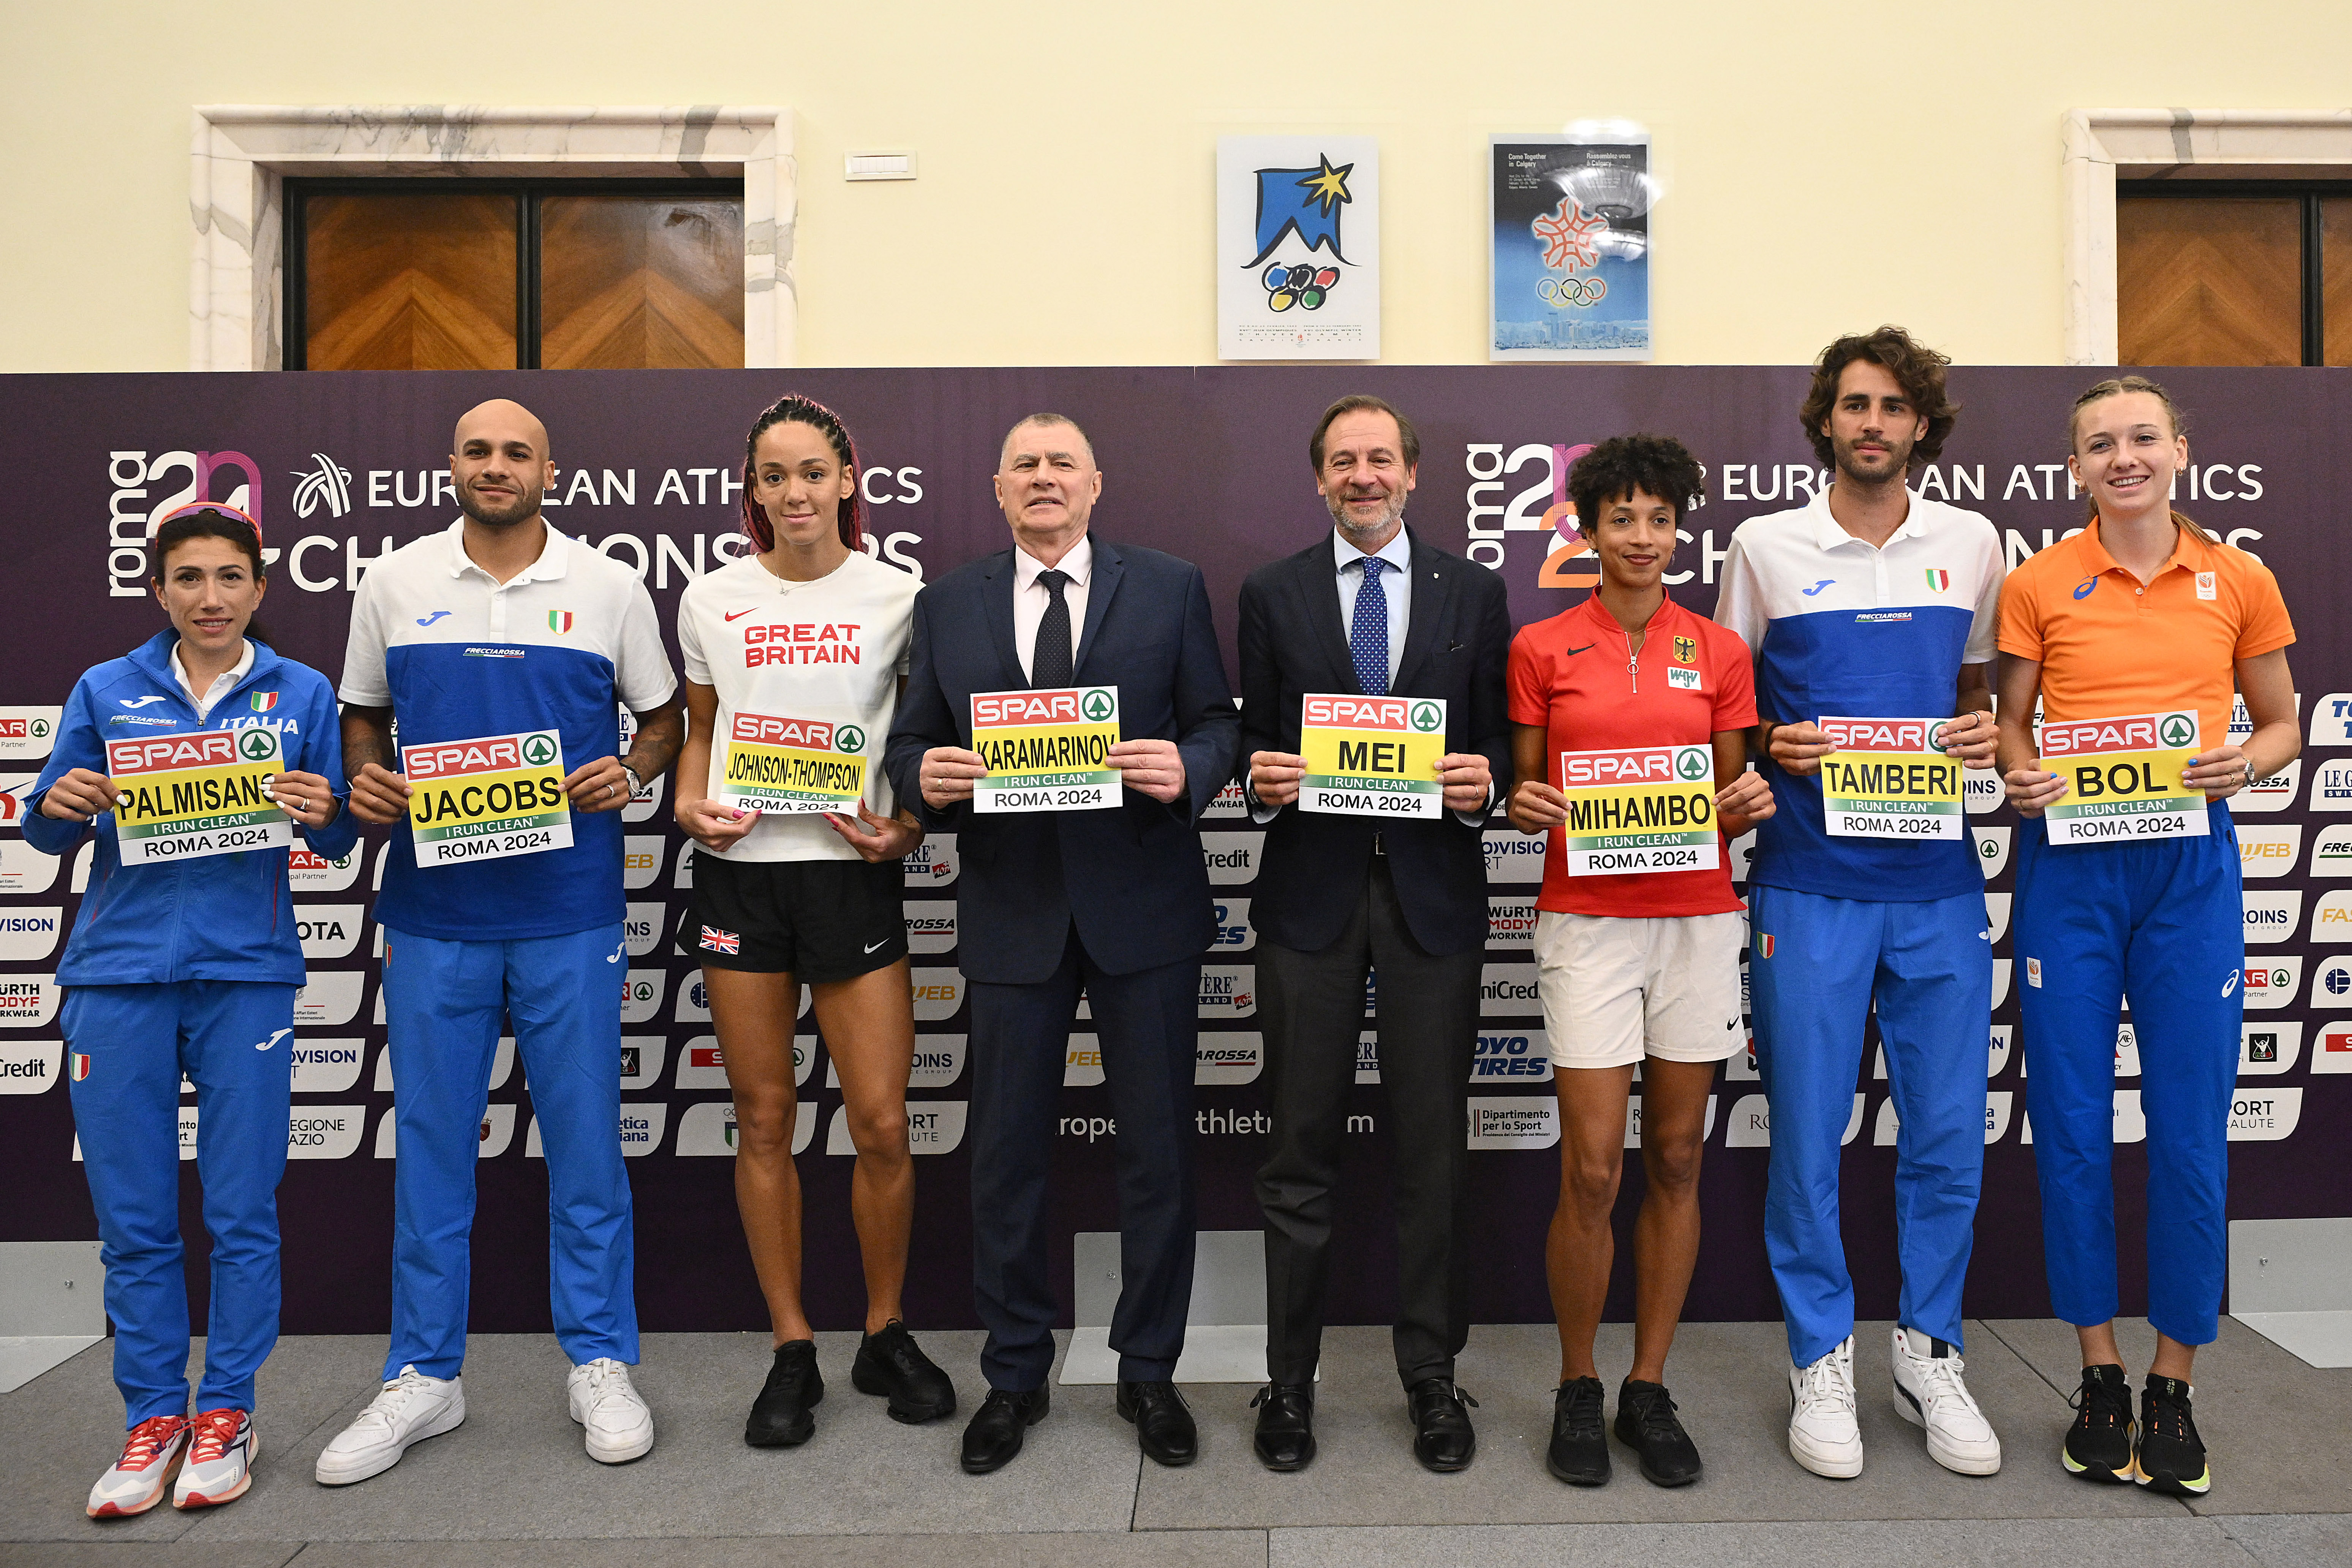 The Rome 2024 European Athletics Championships begin tomorrow: greater than 1600 athletes compete for six days on the Foro Italico.